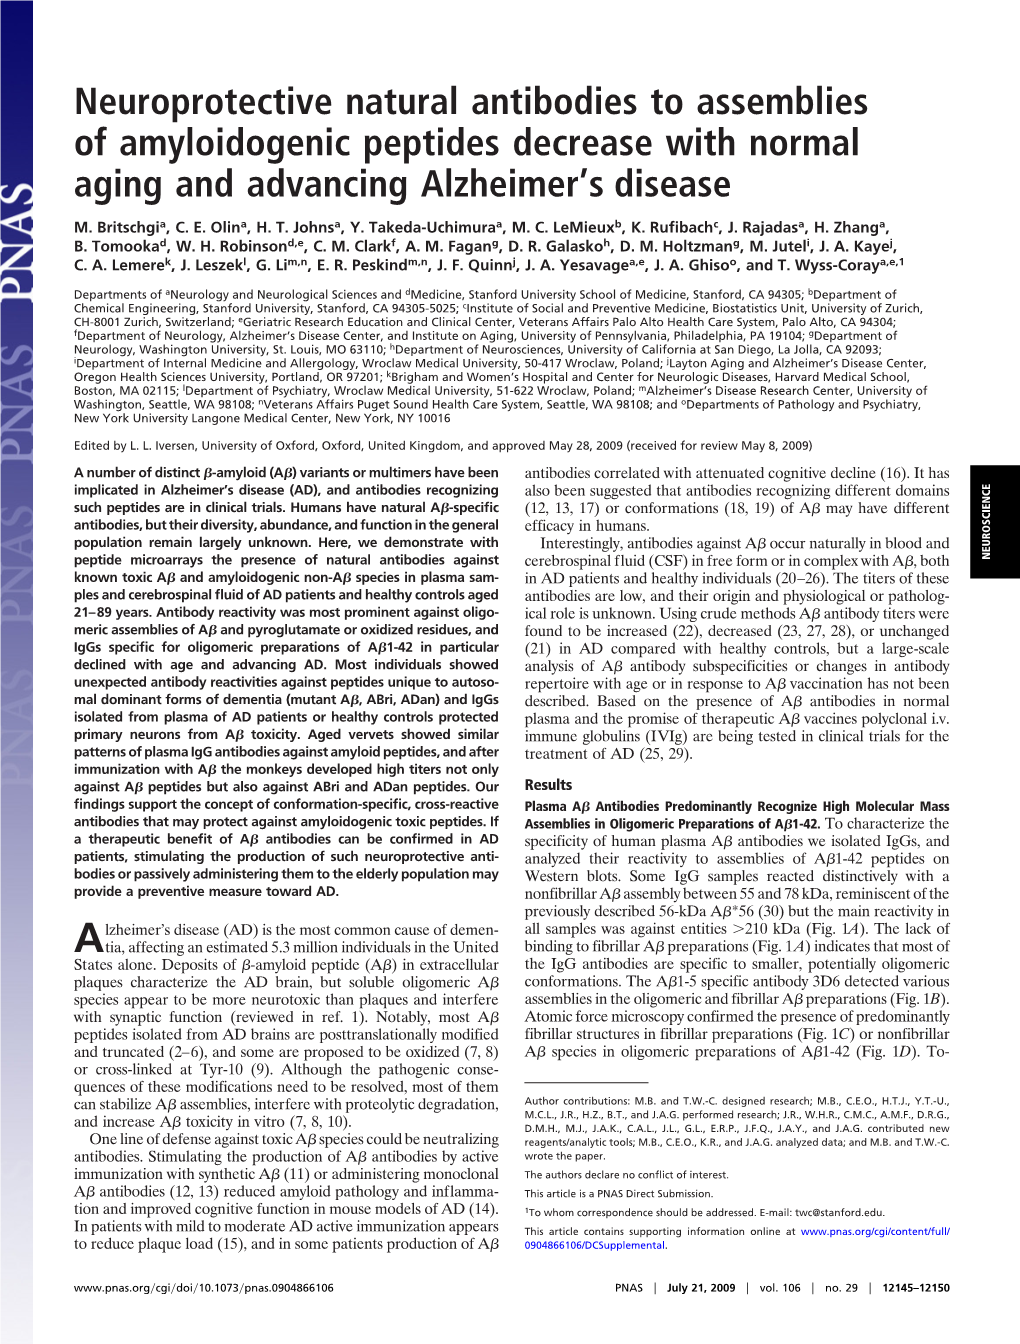 Neuroprotective Natural Antibodies to Assemblies of Amyloidogenic Peptides Decrease with Normal Aging and Advancing Alzheimer’S Disease